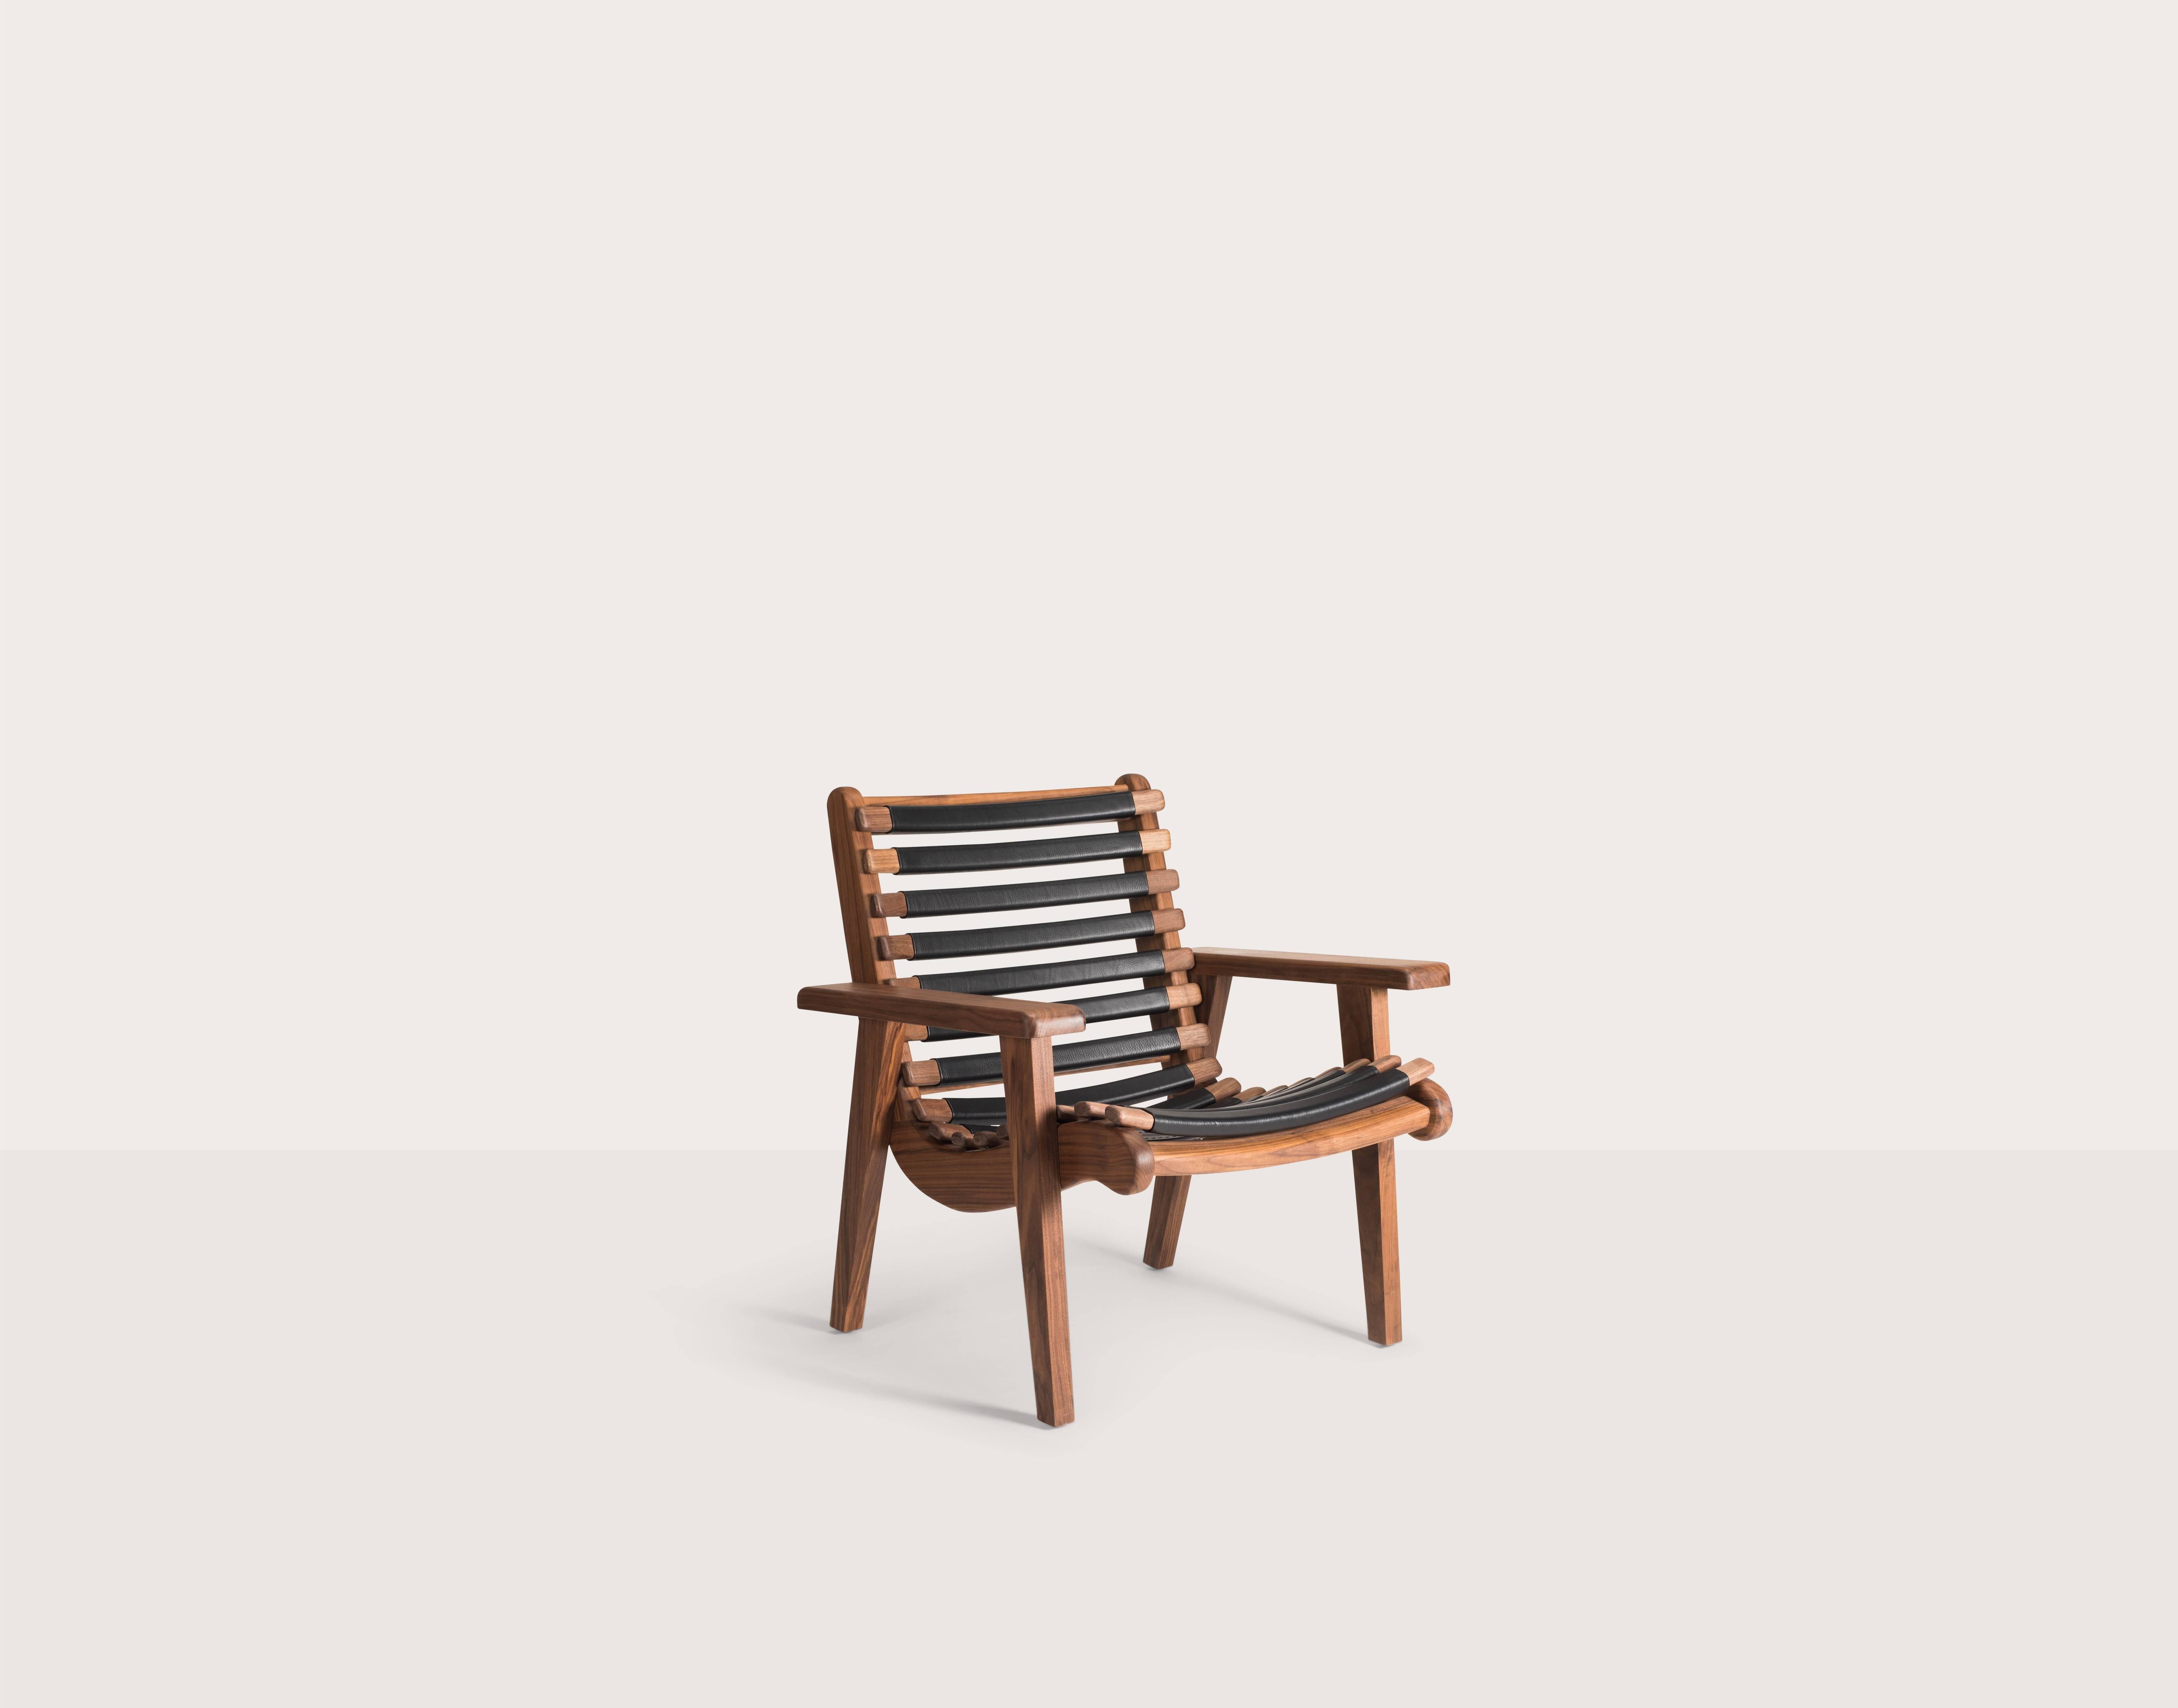 The San Miguelito Armchair is an iconic midcentury armchair design by the Bauhaus trained American designer Michael van Beuren, realized during his time in Mexico. It is meticulously handcrafted and available in a variety of solid woods. First